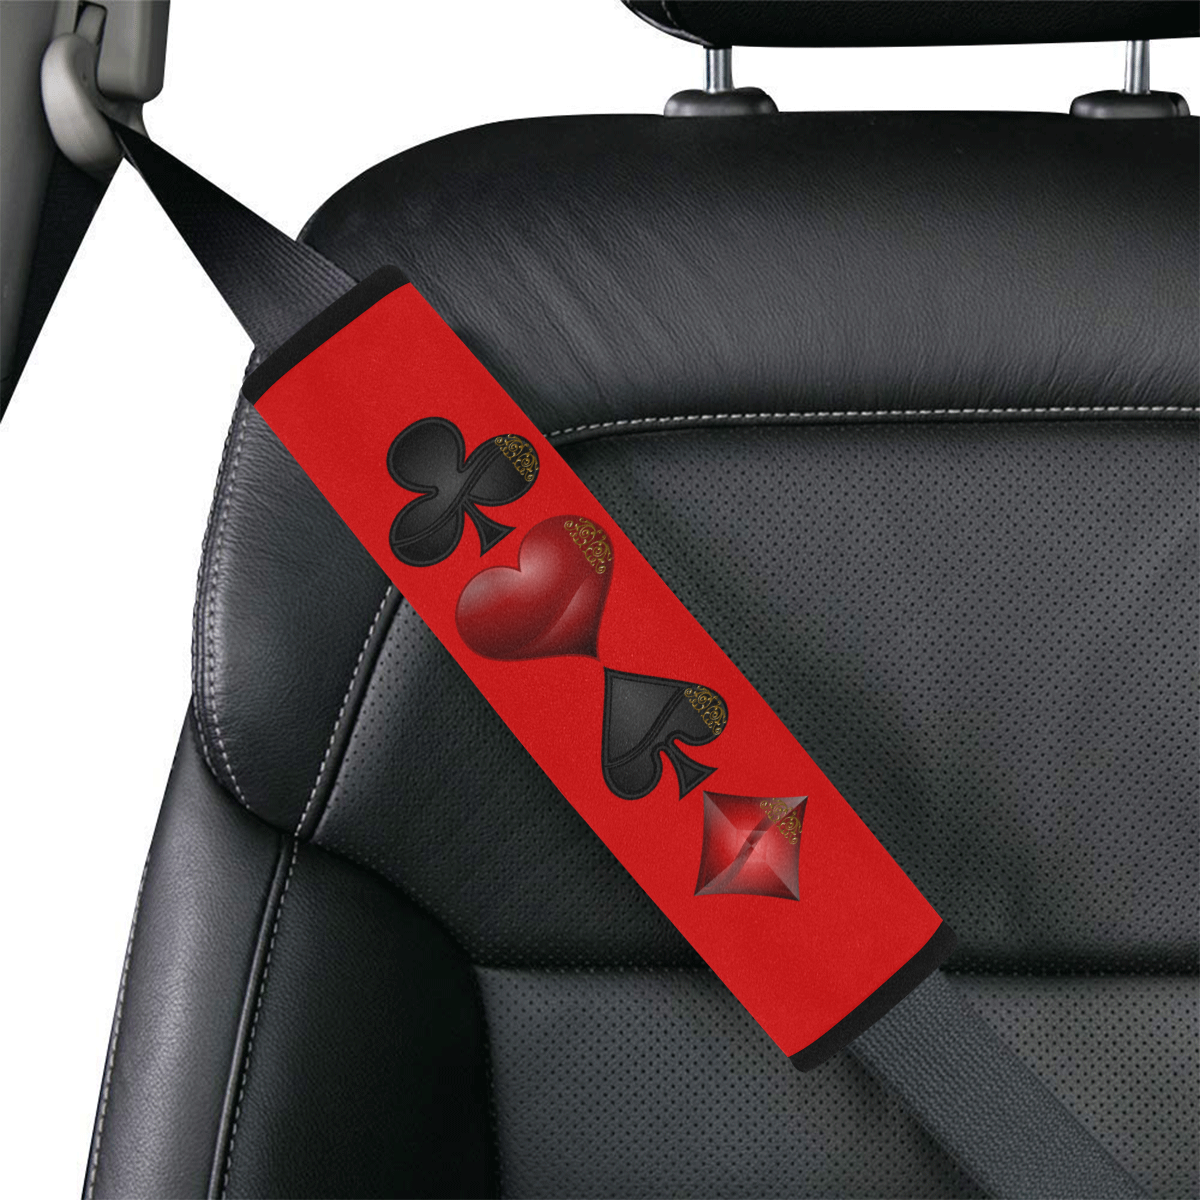 Las Vegas  Black and Red Casino Poker Card Shapes on Red Car Seat Belt Cover 7''x12.6''